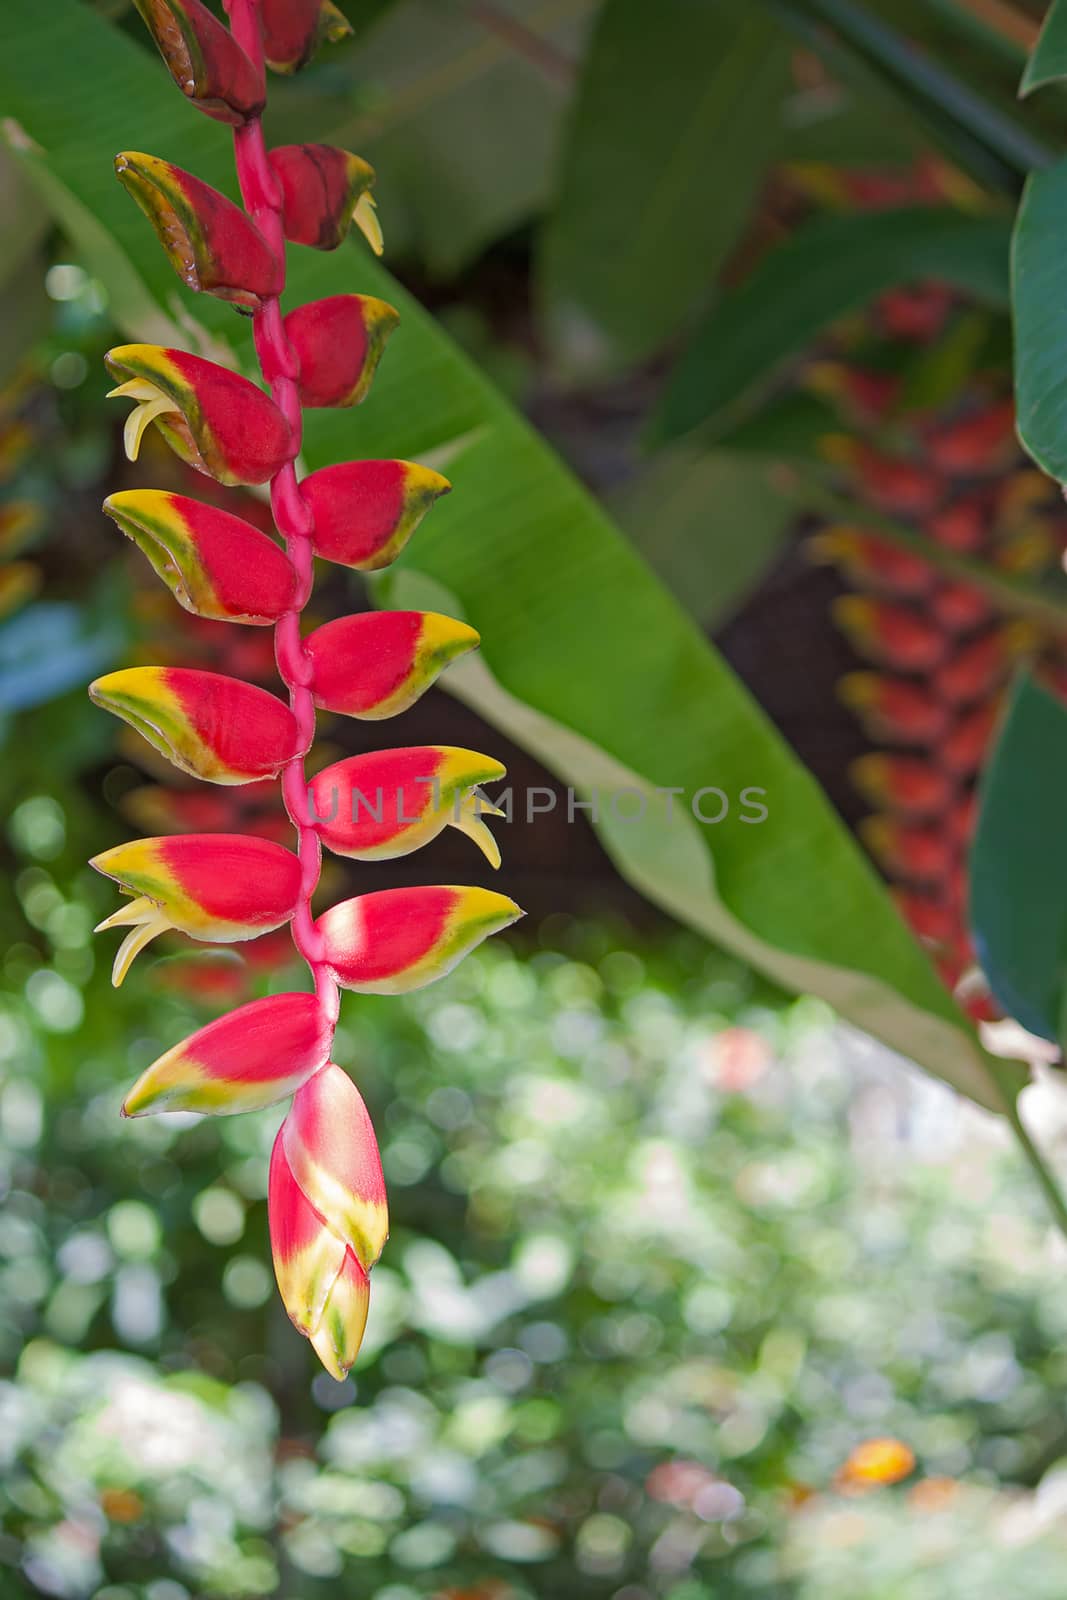 Heliconia flowers close up on a background of leaves.